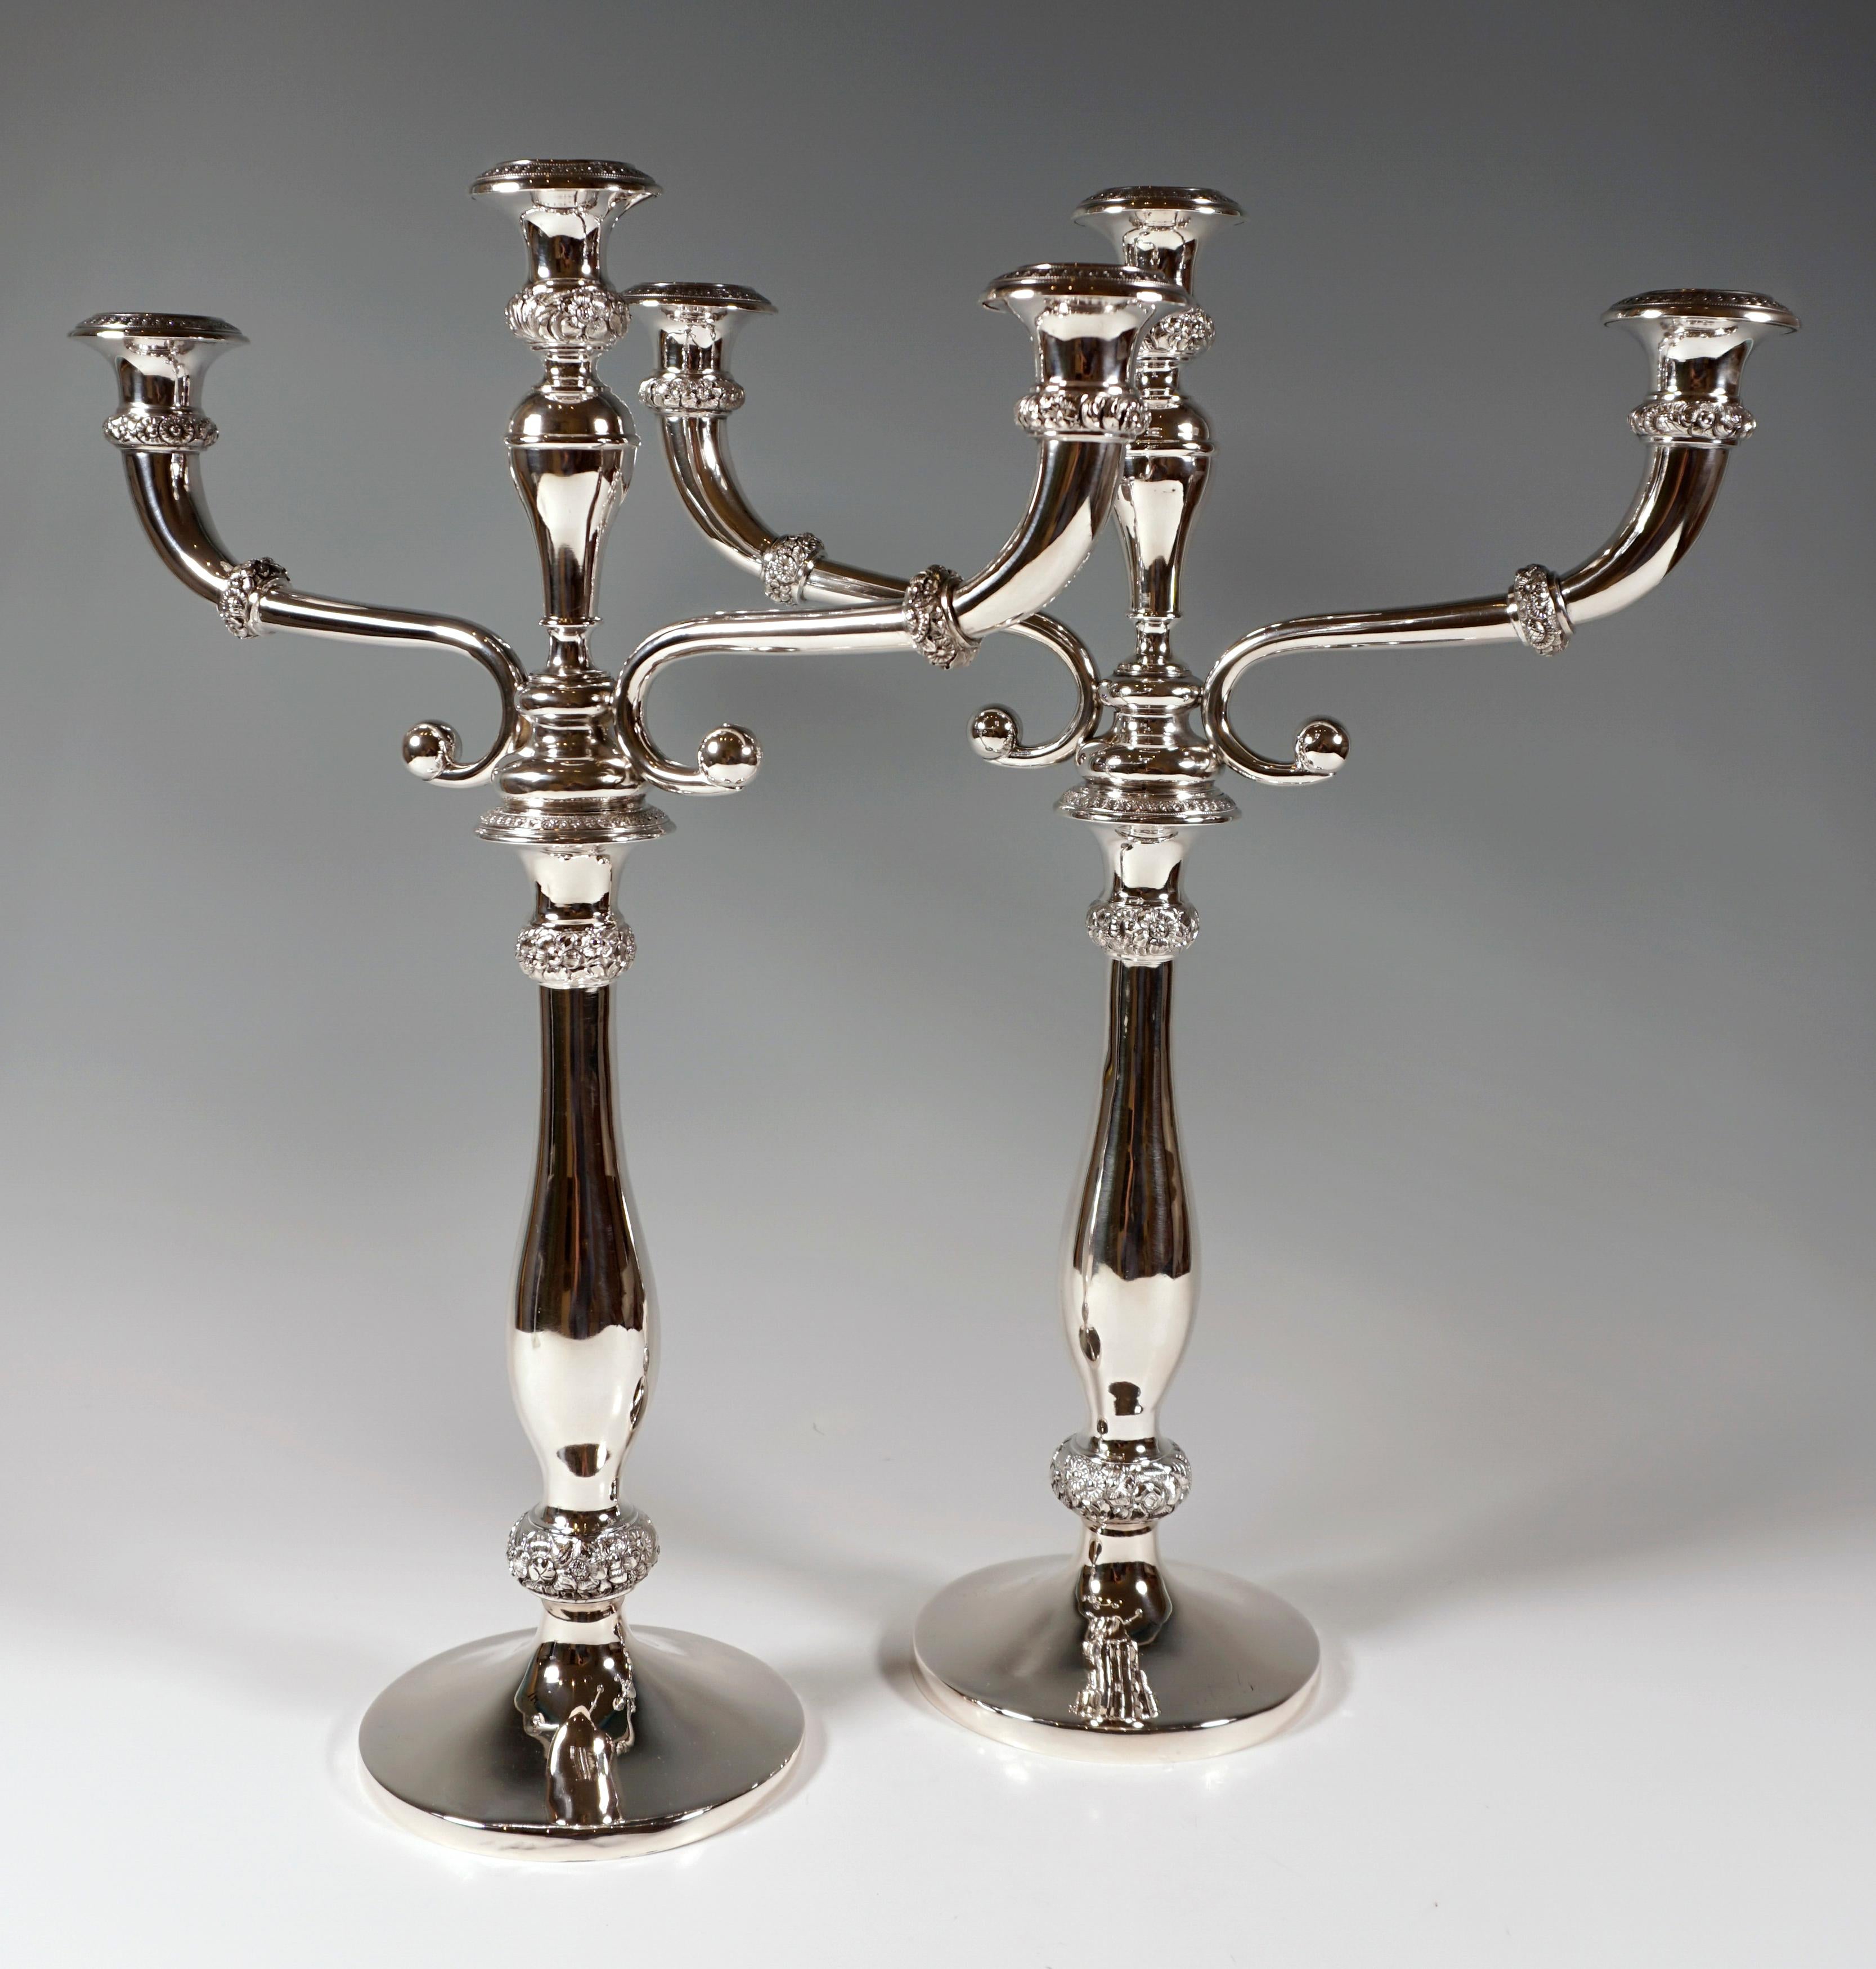 Two elegant silver candleholders on round stand with smooth baluster shaped stem, beaded rings decorated with sculptural floral & rocaille decor, vase shaped spouts with chased palmette decor on the high arched eaves pieces, can be used as single